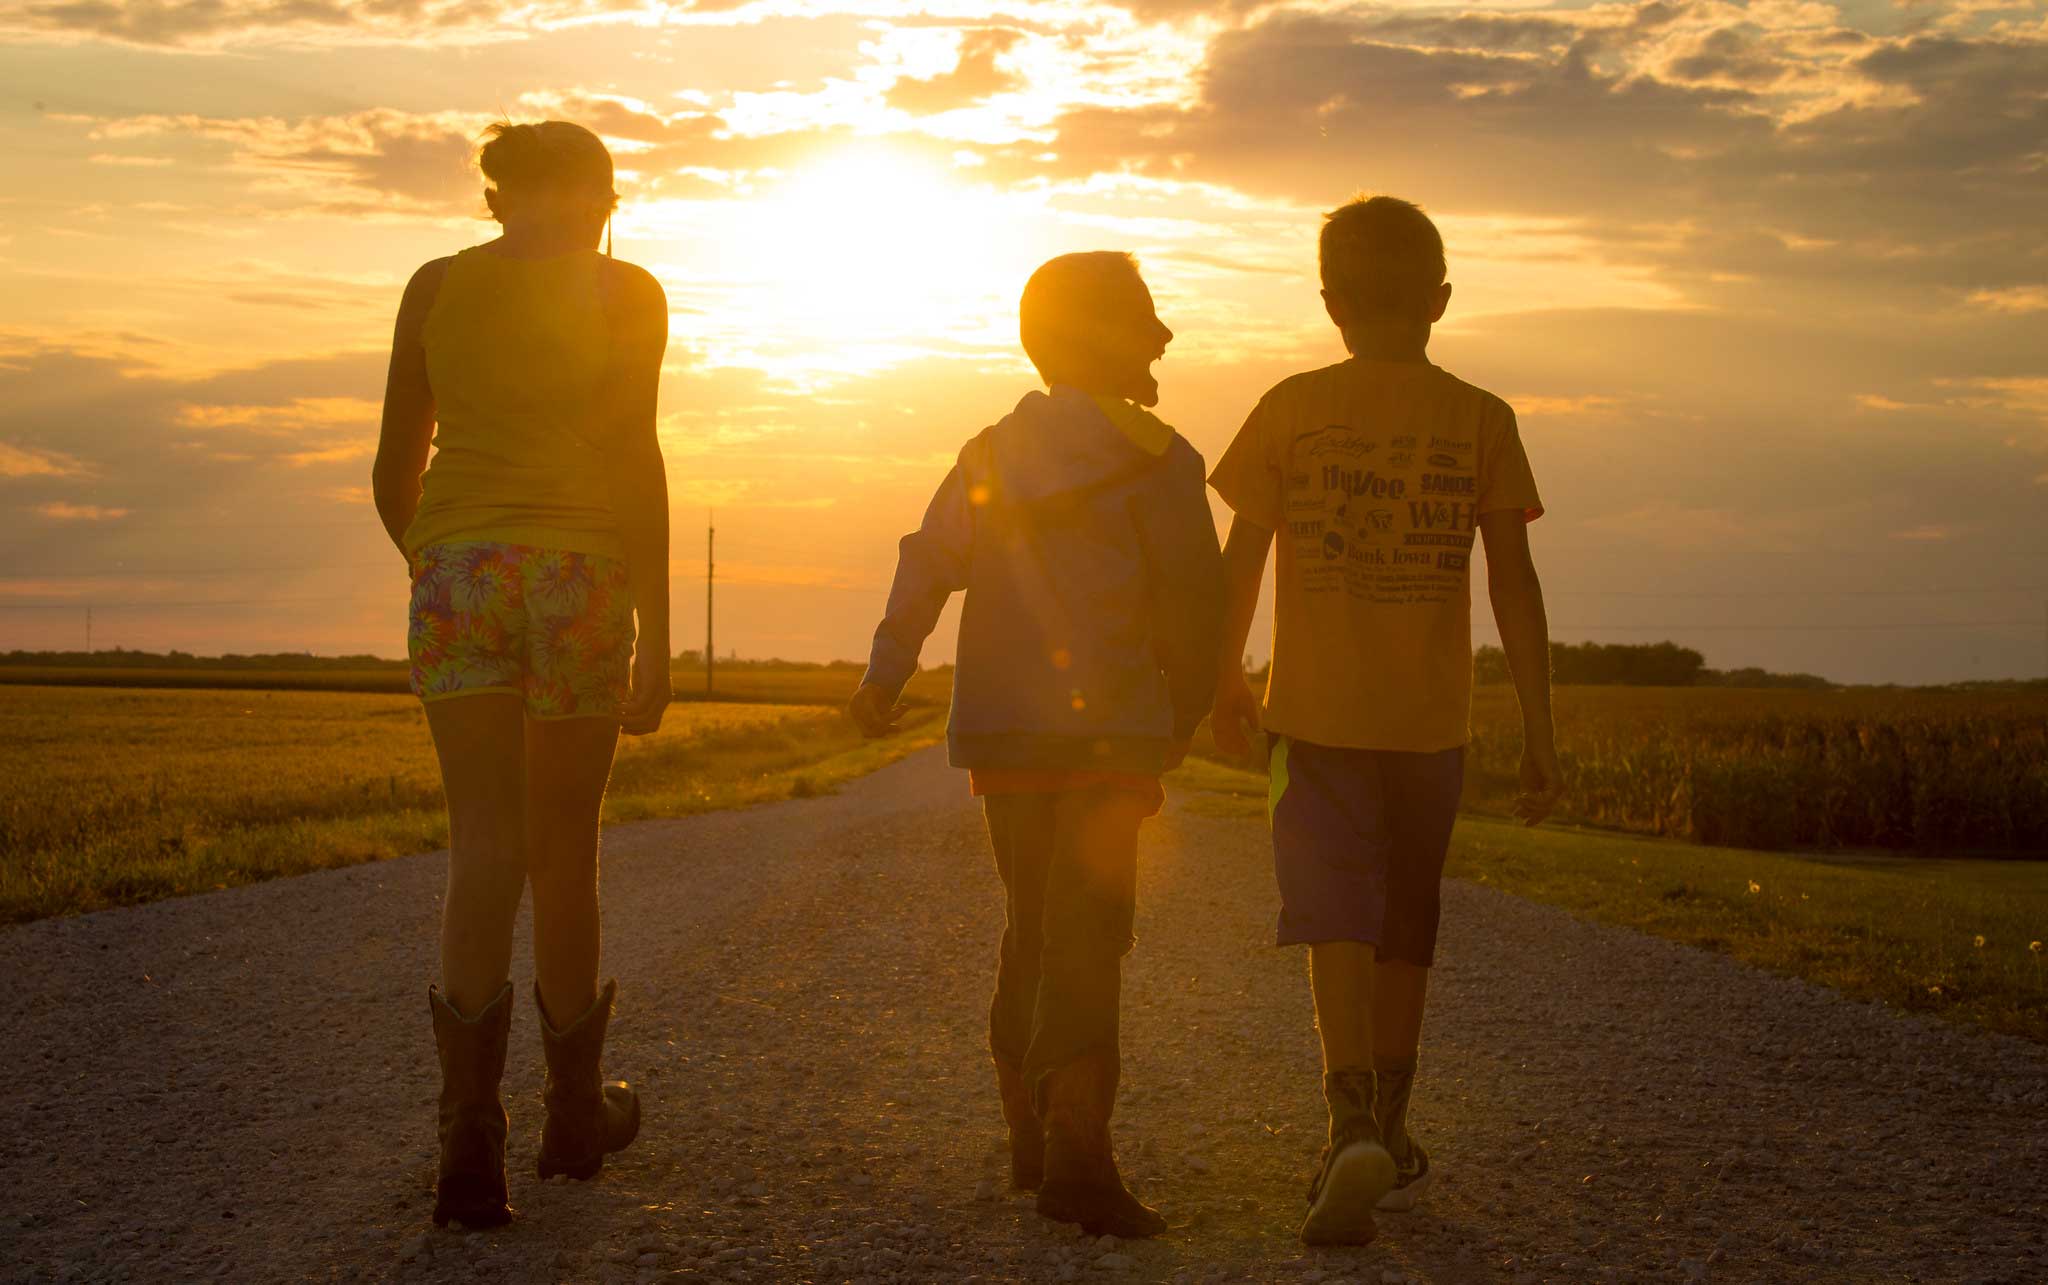 A family going for sunset walk down a country road.